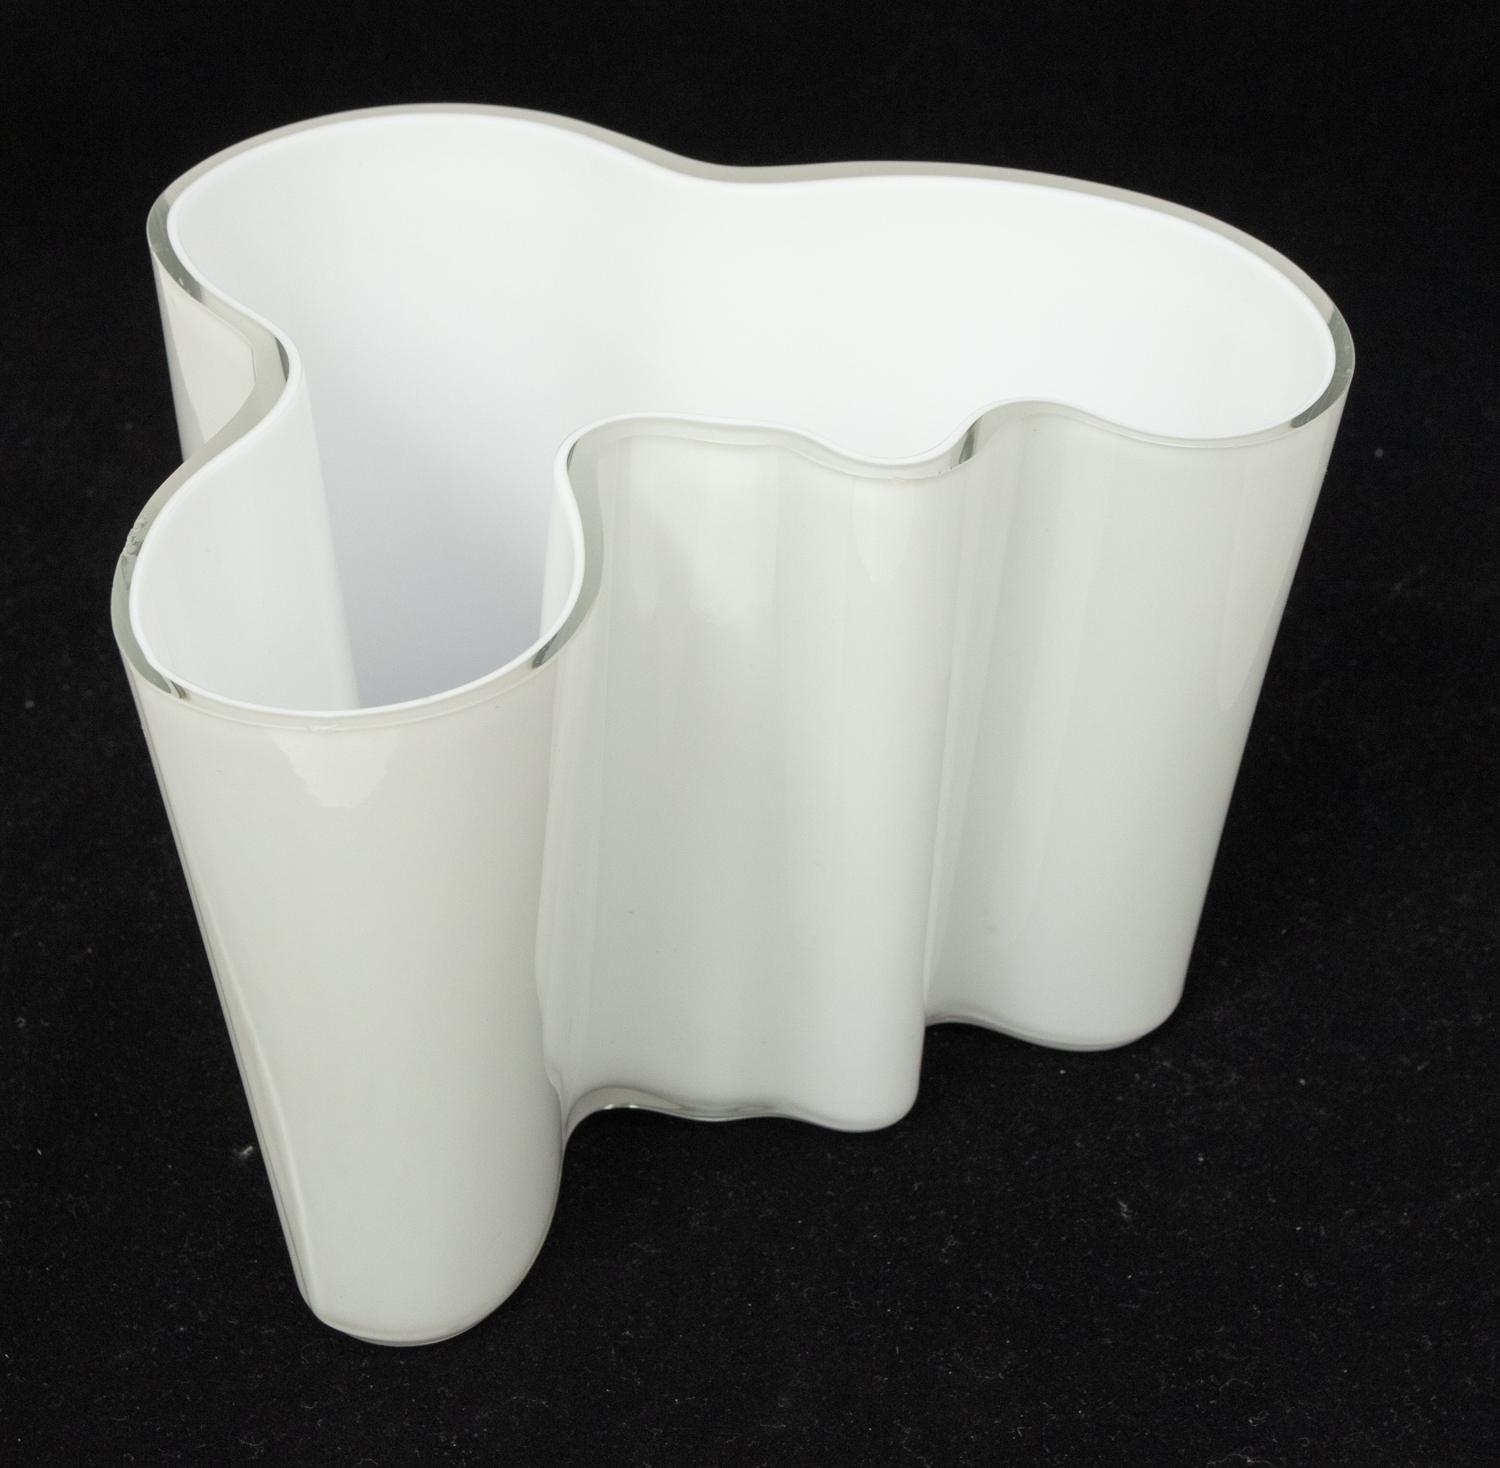 A 20th century Alvar Aalto, Finnish glass vase, of abstract shape in white colourway, signed - Image 3 of 4